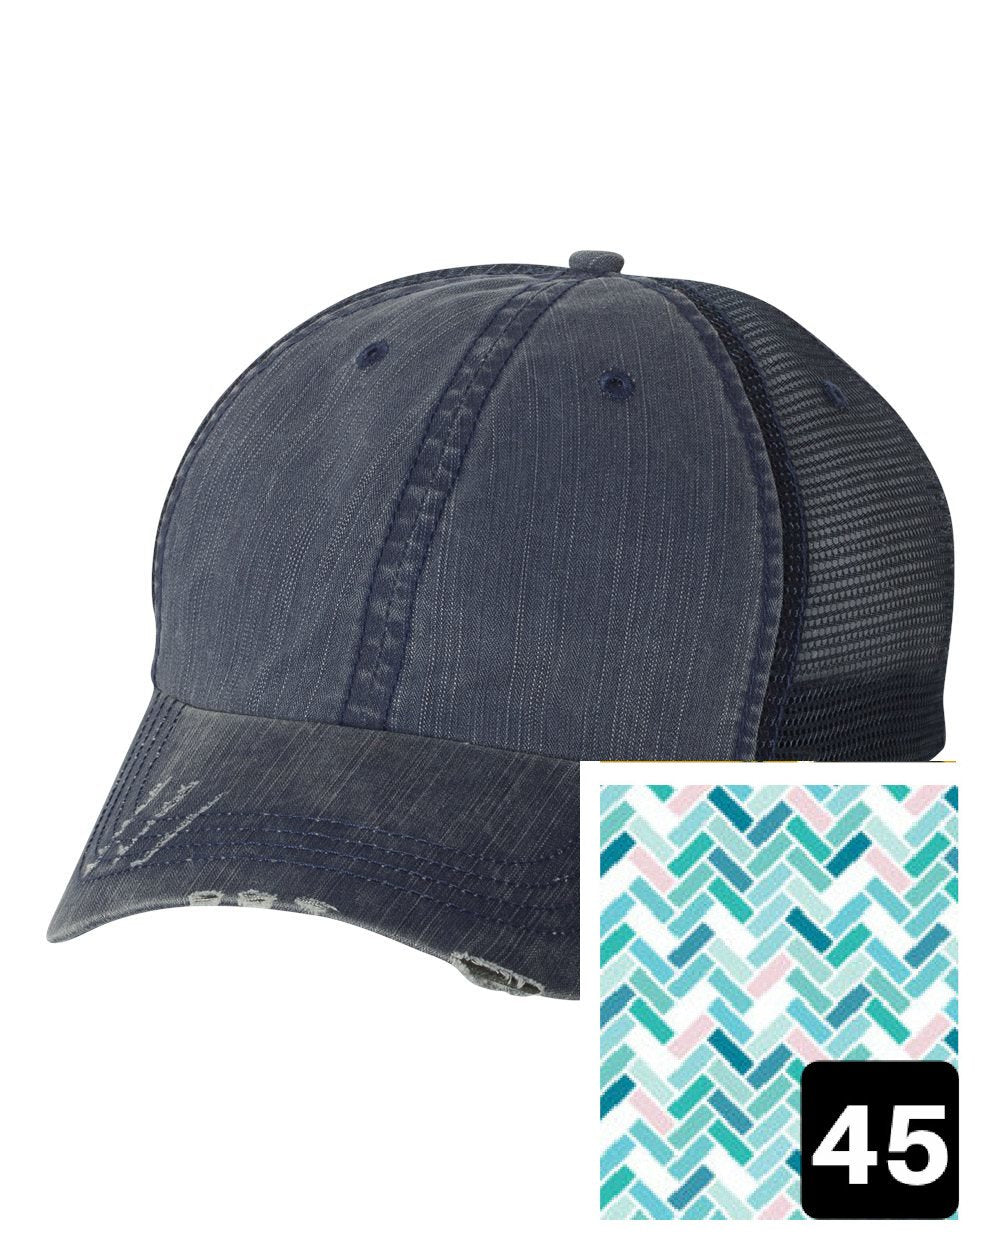 Mississippi Hat - Distressed Ponytail or Messy Bun Hat  - Many Fabric Choices